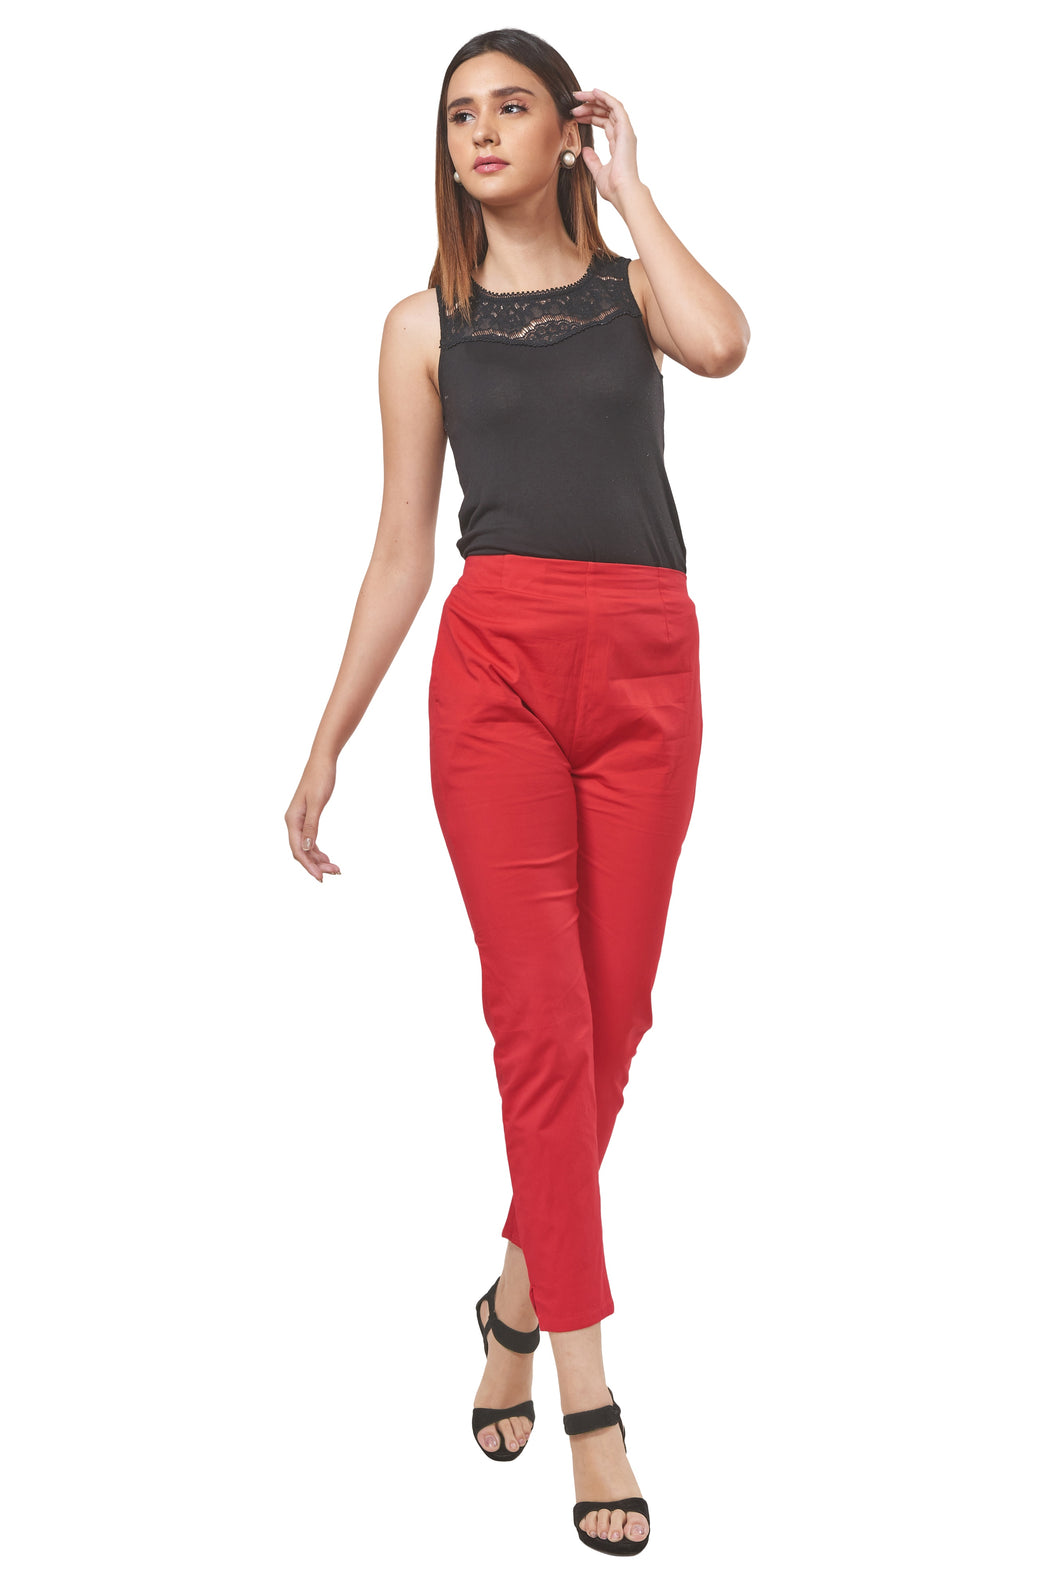 Pencil Pants (Poppy Red)